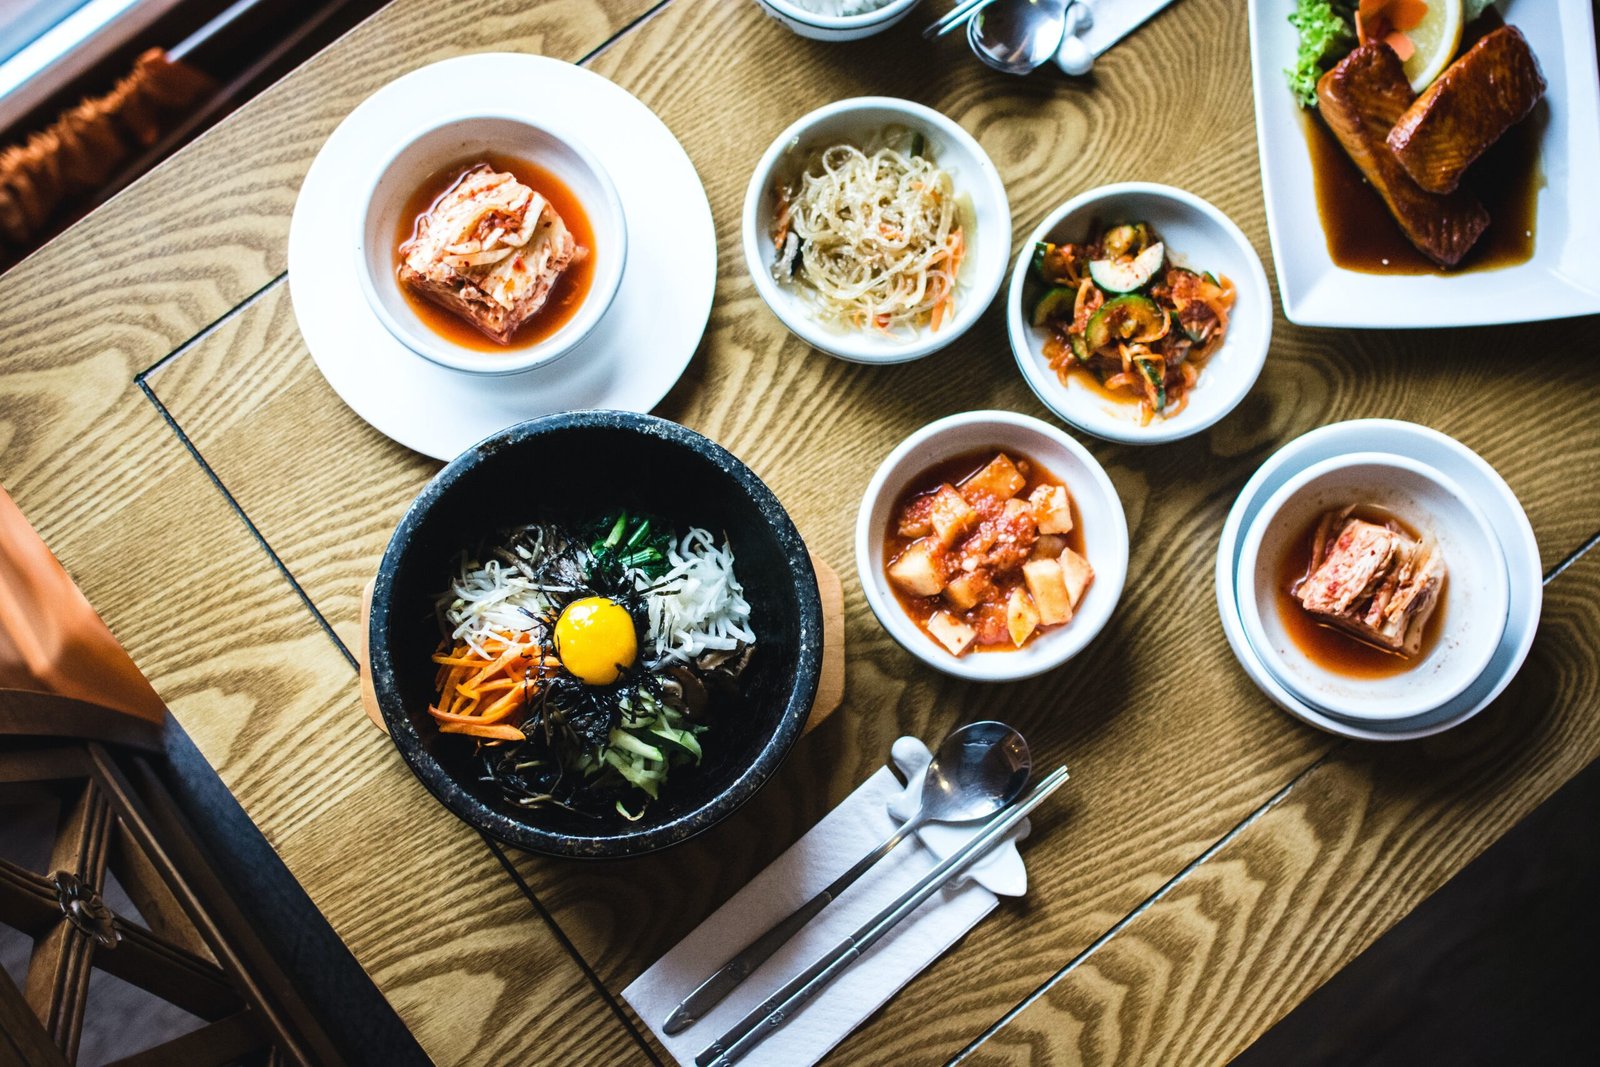 Can You Recommend Some Beginner-friendly Korean Recipes?